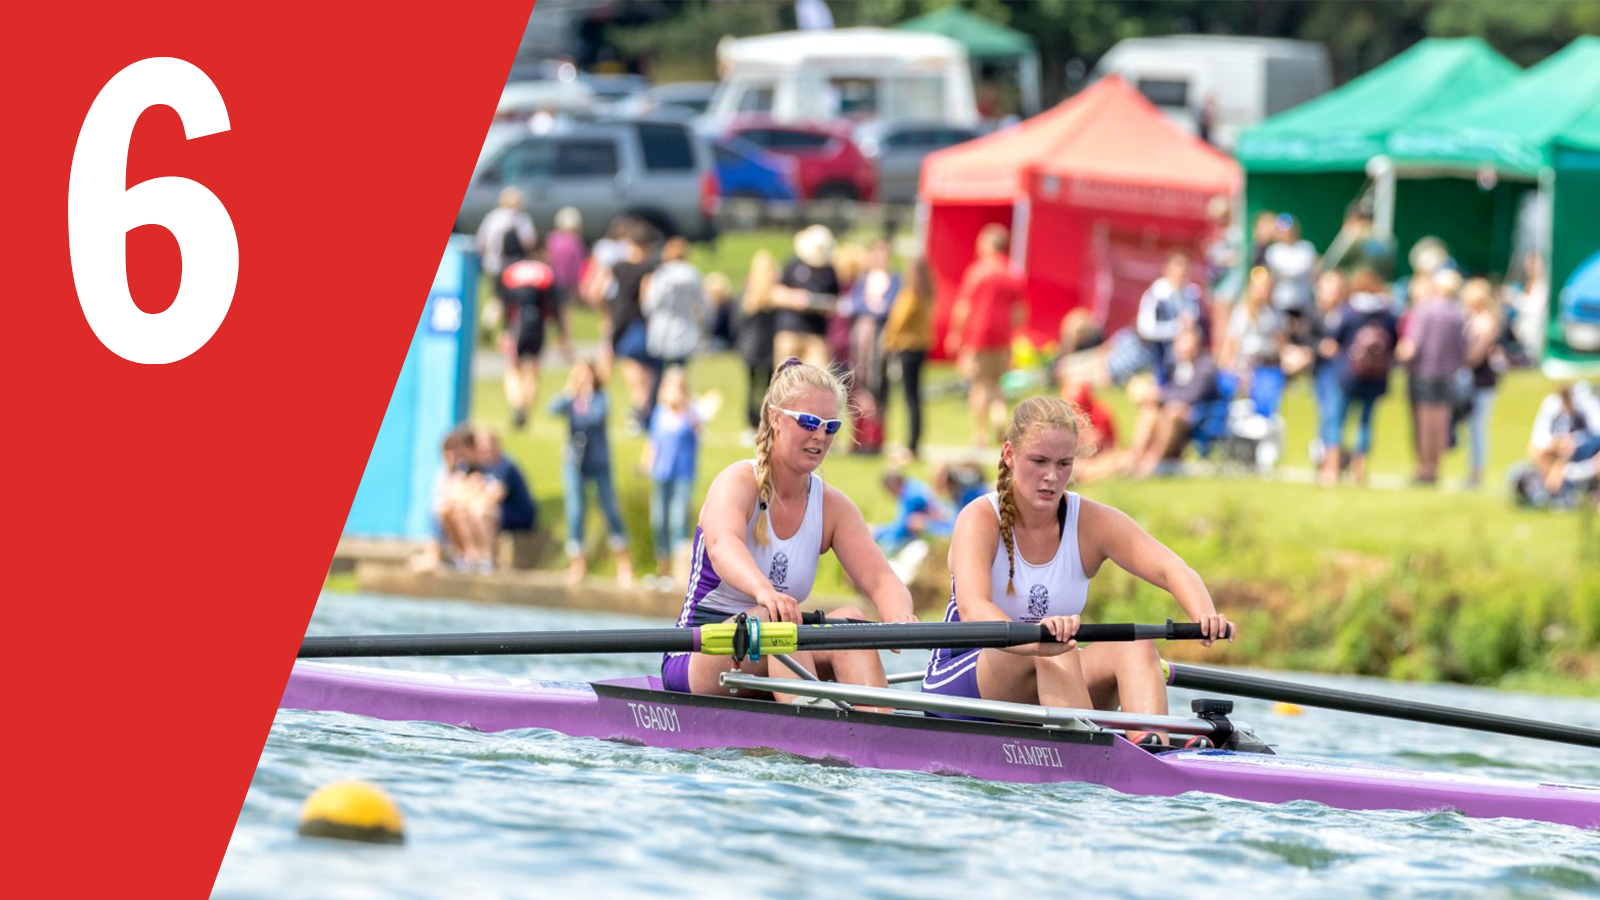 Highlight 6 of the decade grassroots rowing goes from strength to